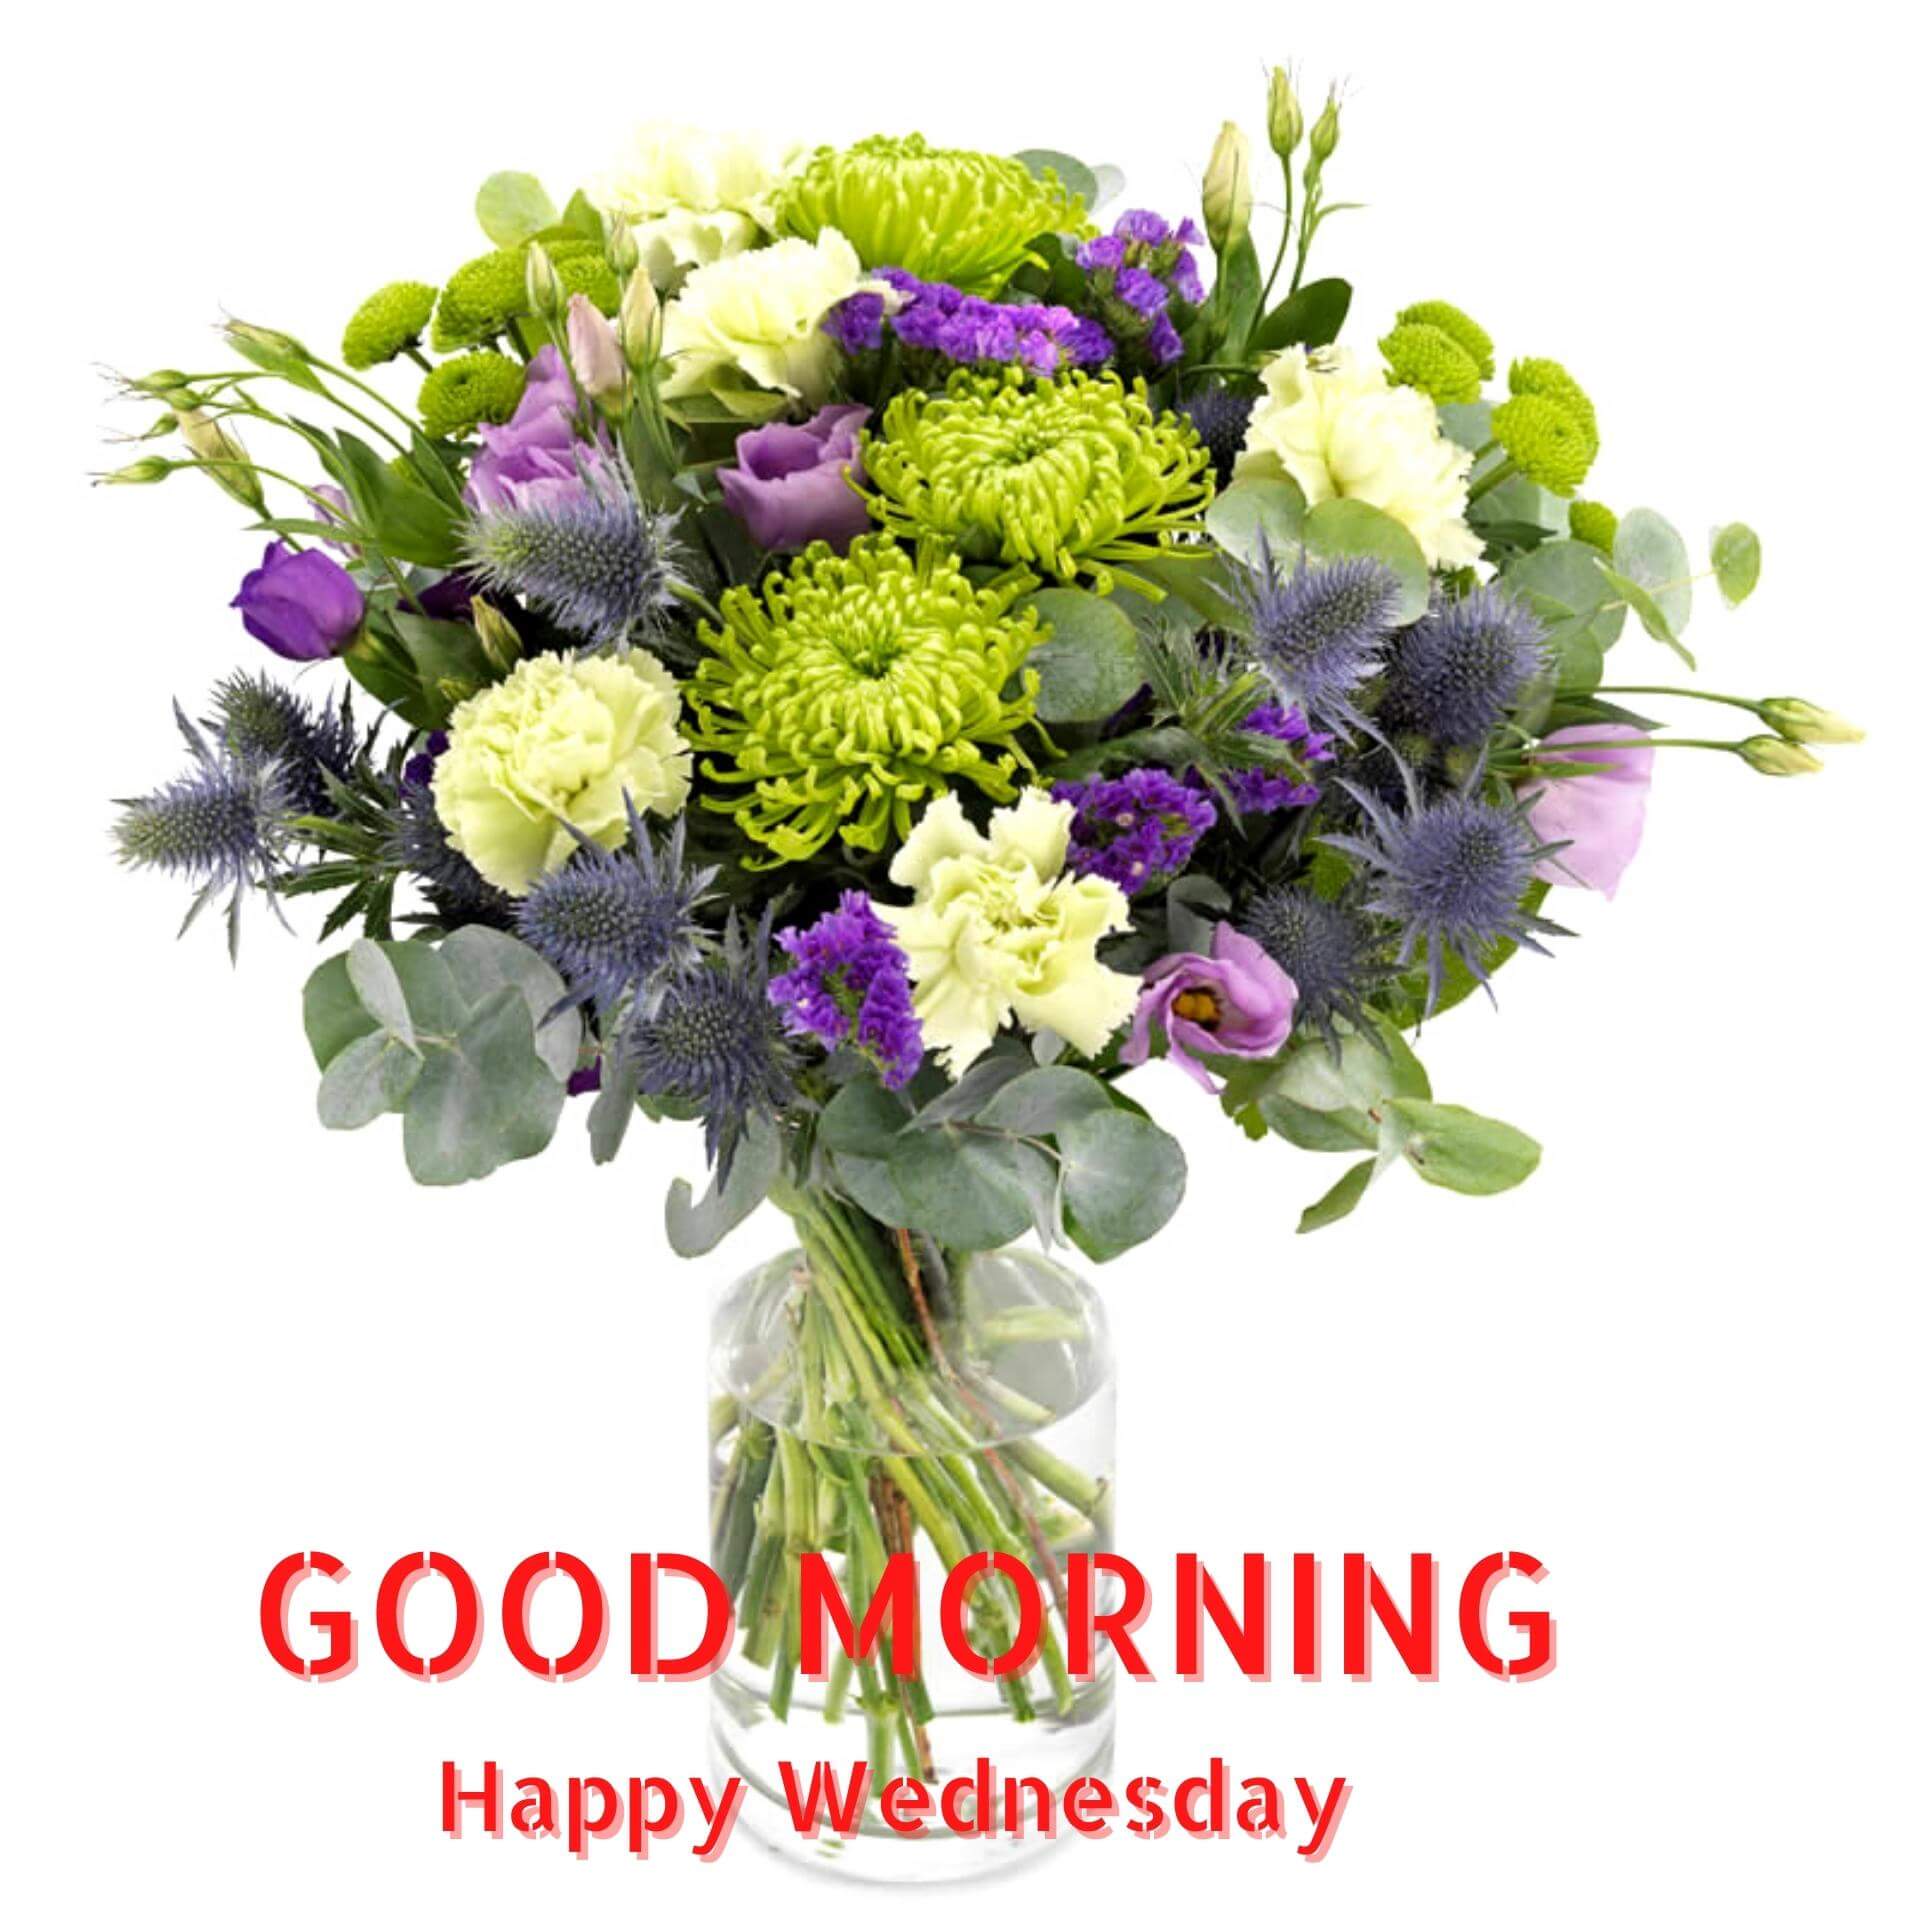 Wednesday good morning Wallpaper photo With Flower